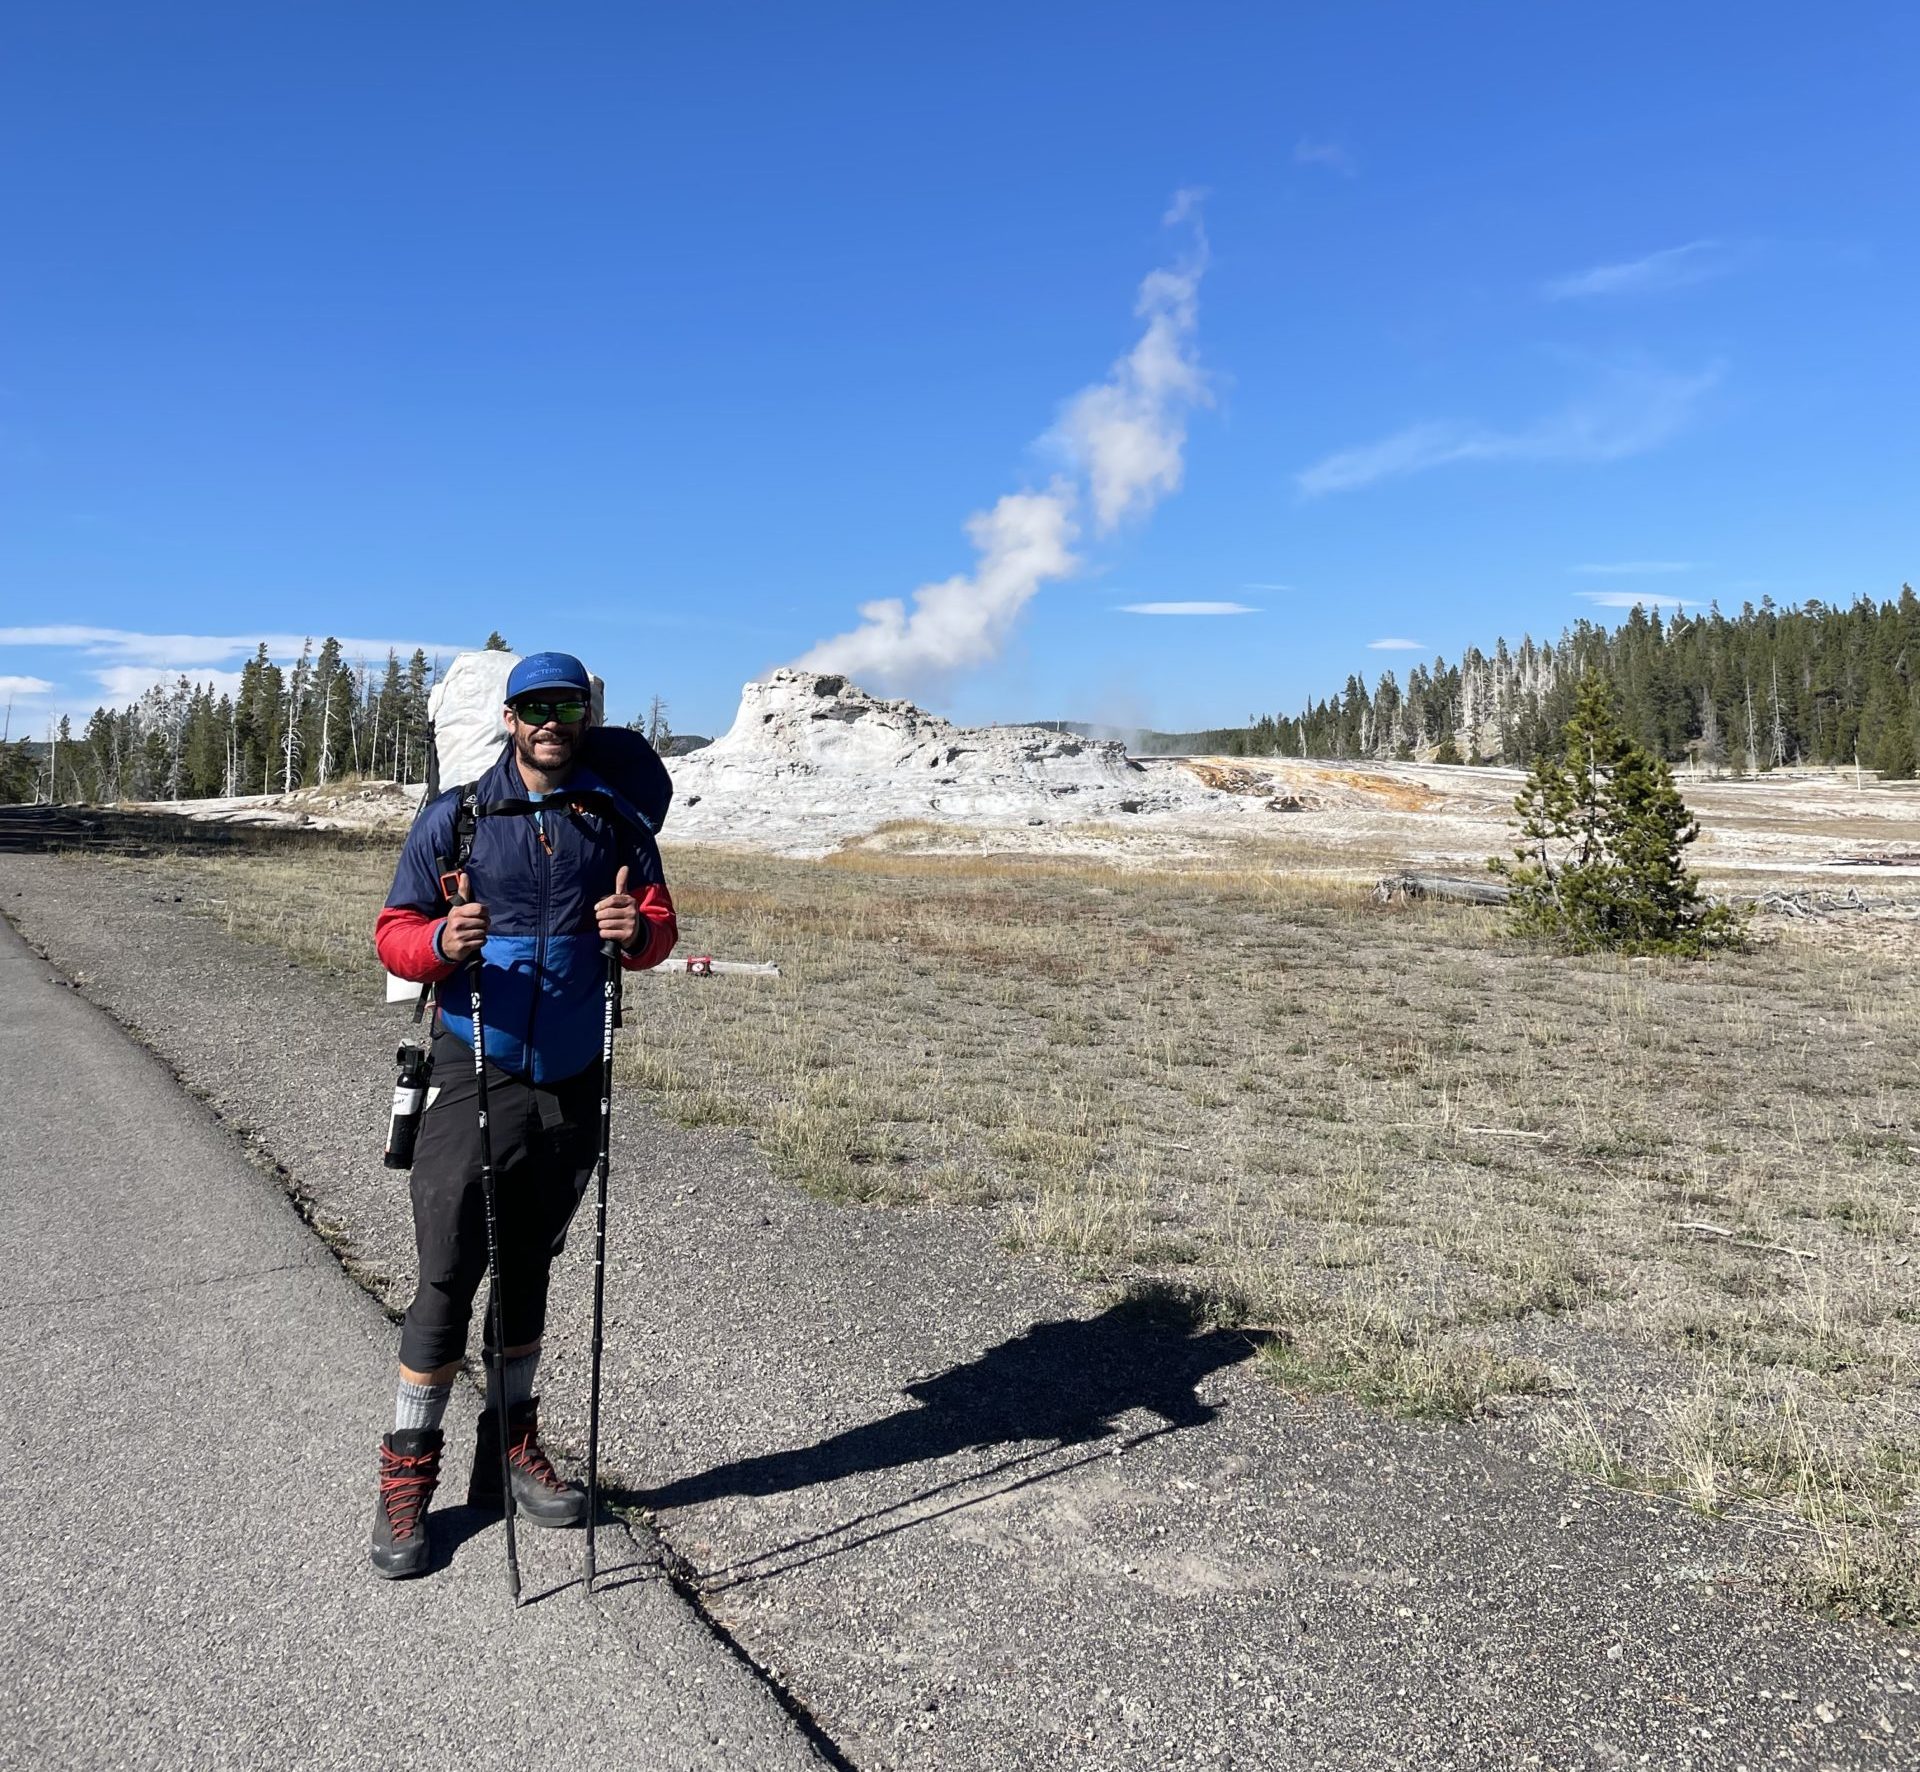 10 Days and 9 Nights Journeying through Yellowstone National Park’s Back Country